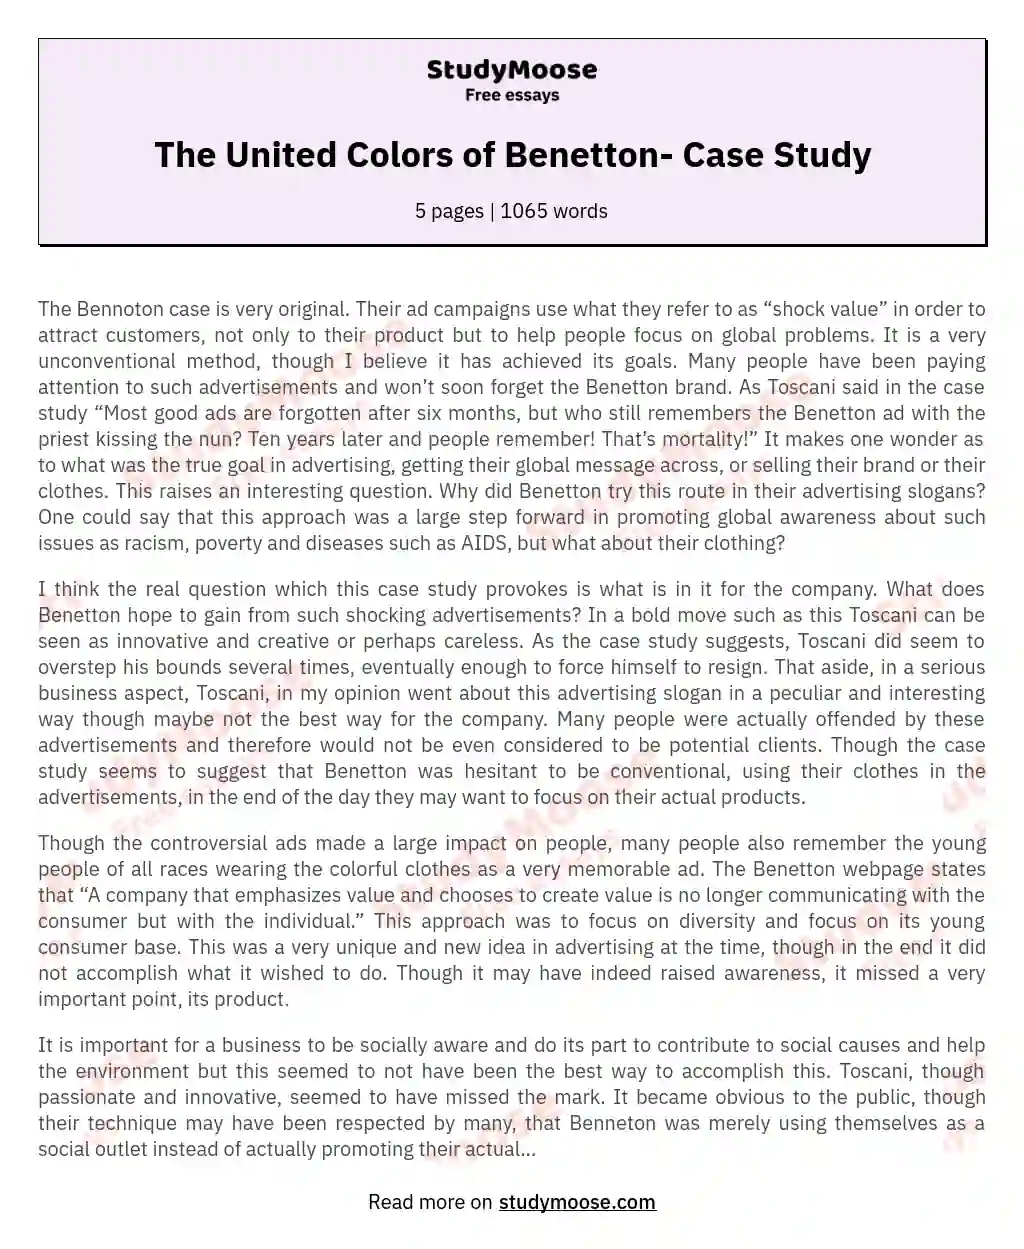 The United Colors of Benetton- Case Study essay